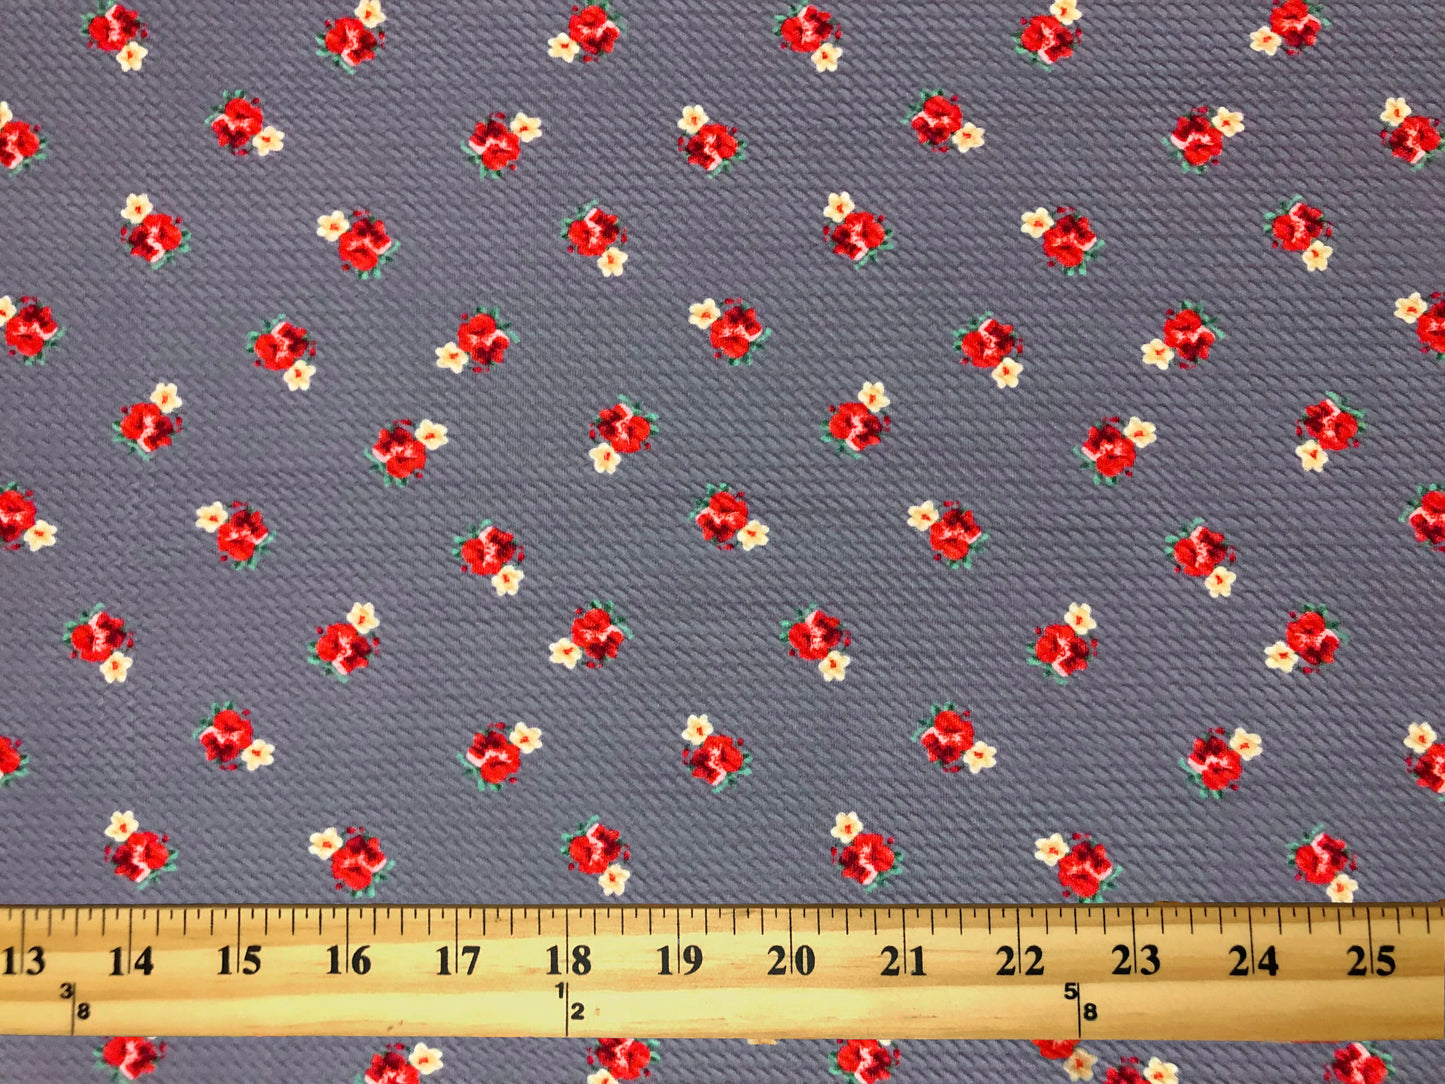 Bullet Knit Printed Fabric-Lavender Red Roses-BPR267-Sold by the Yard